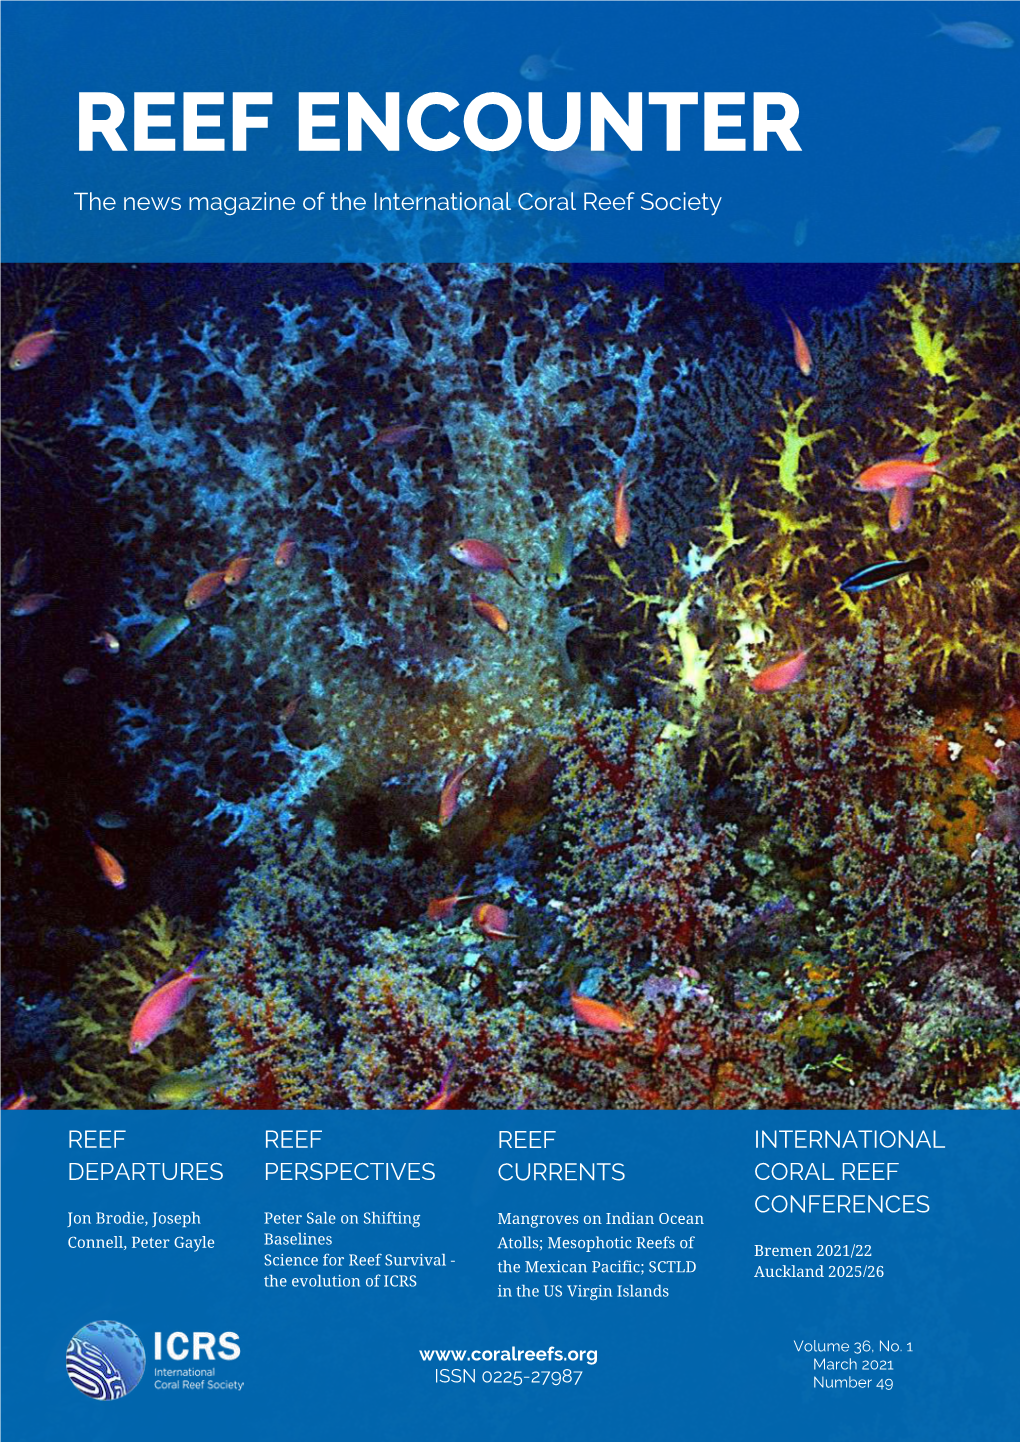 REEF ENCOUNTER the News Magazine of the International Coral Reef Society